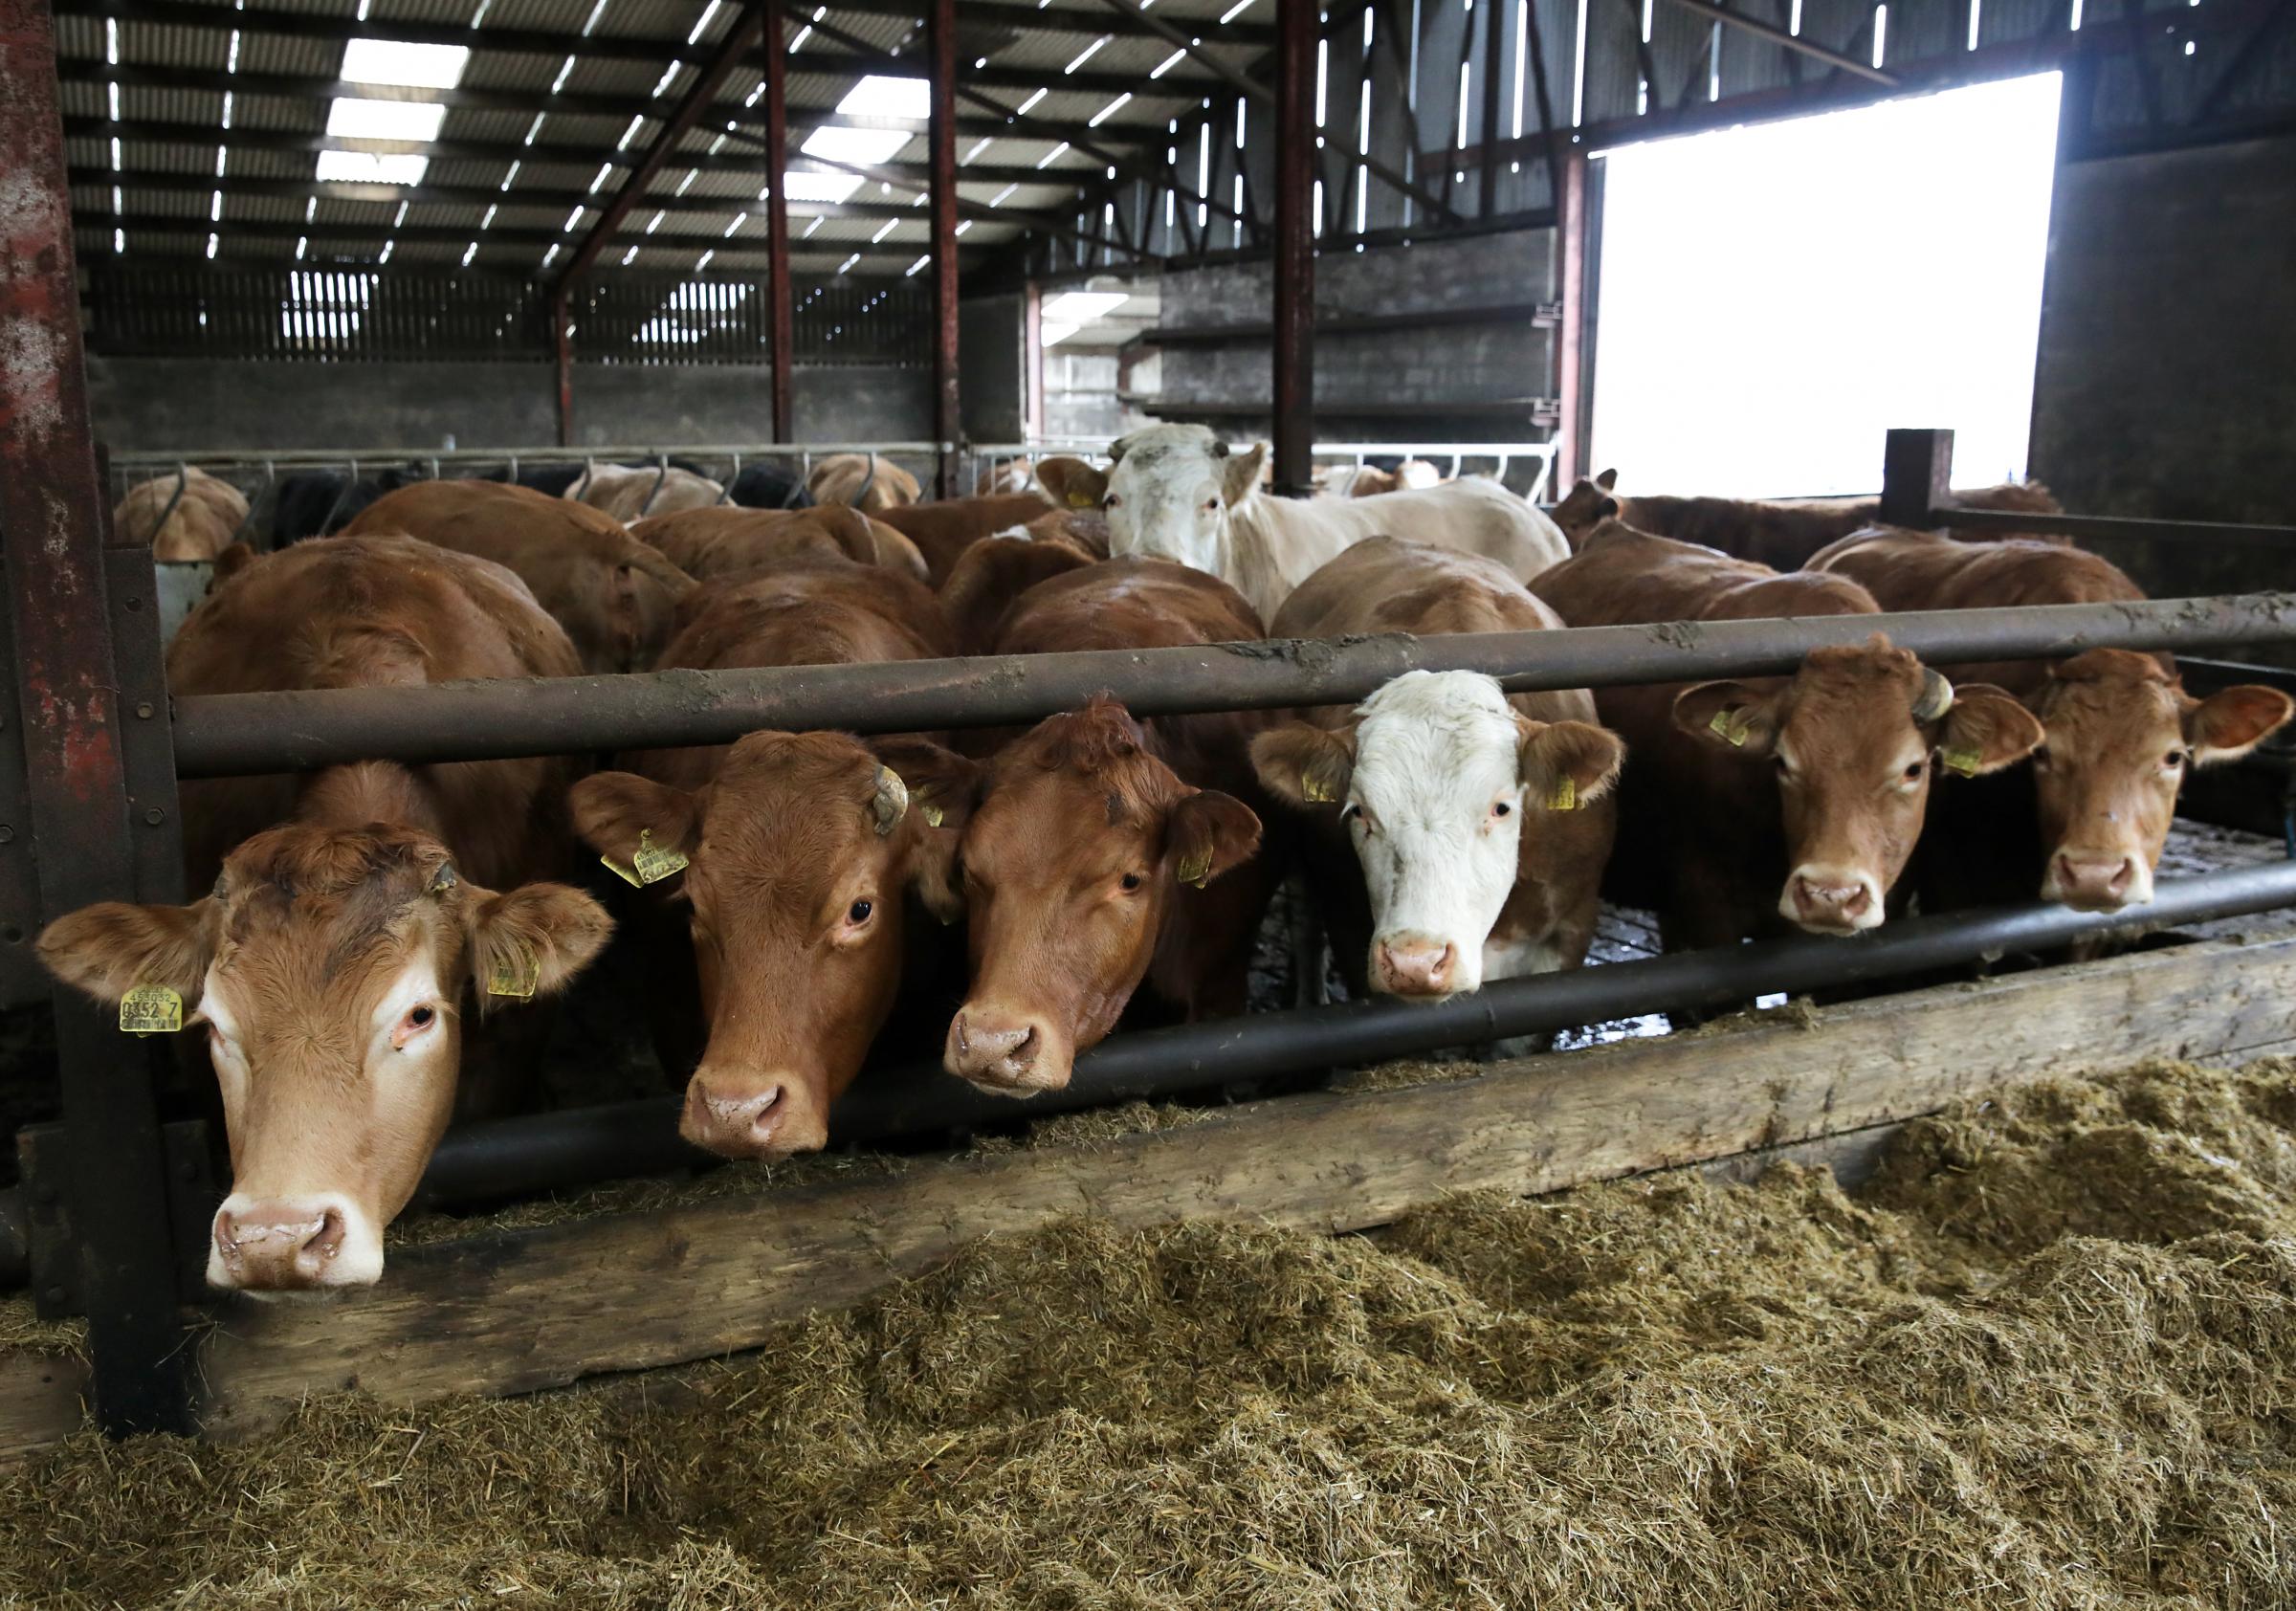 New data shows beef prices up by over 32p per kg in past year